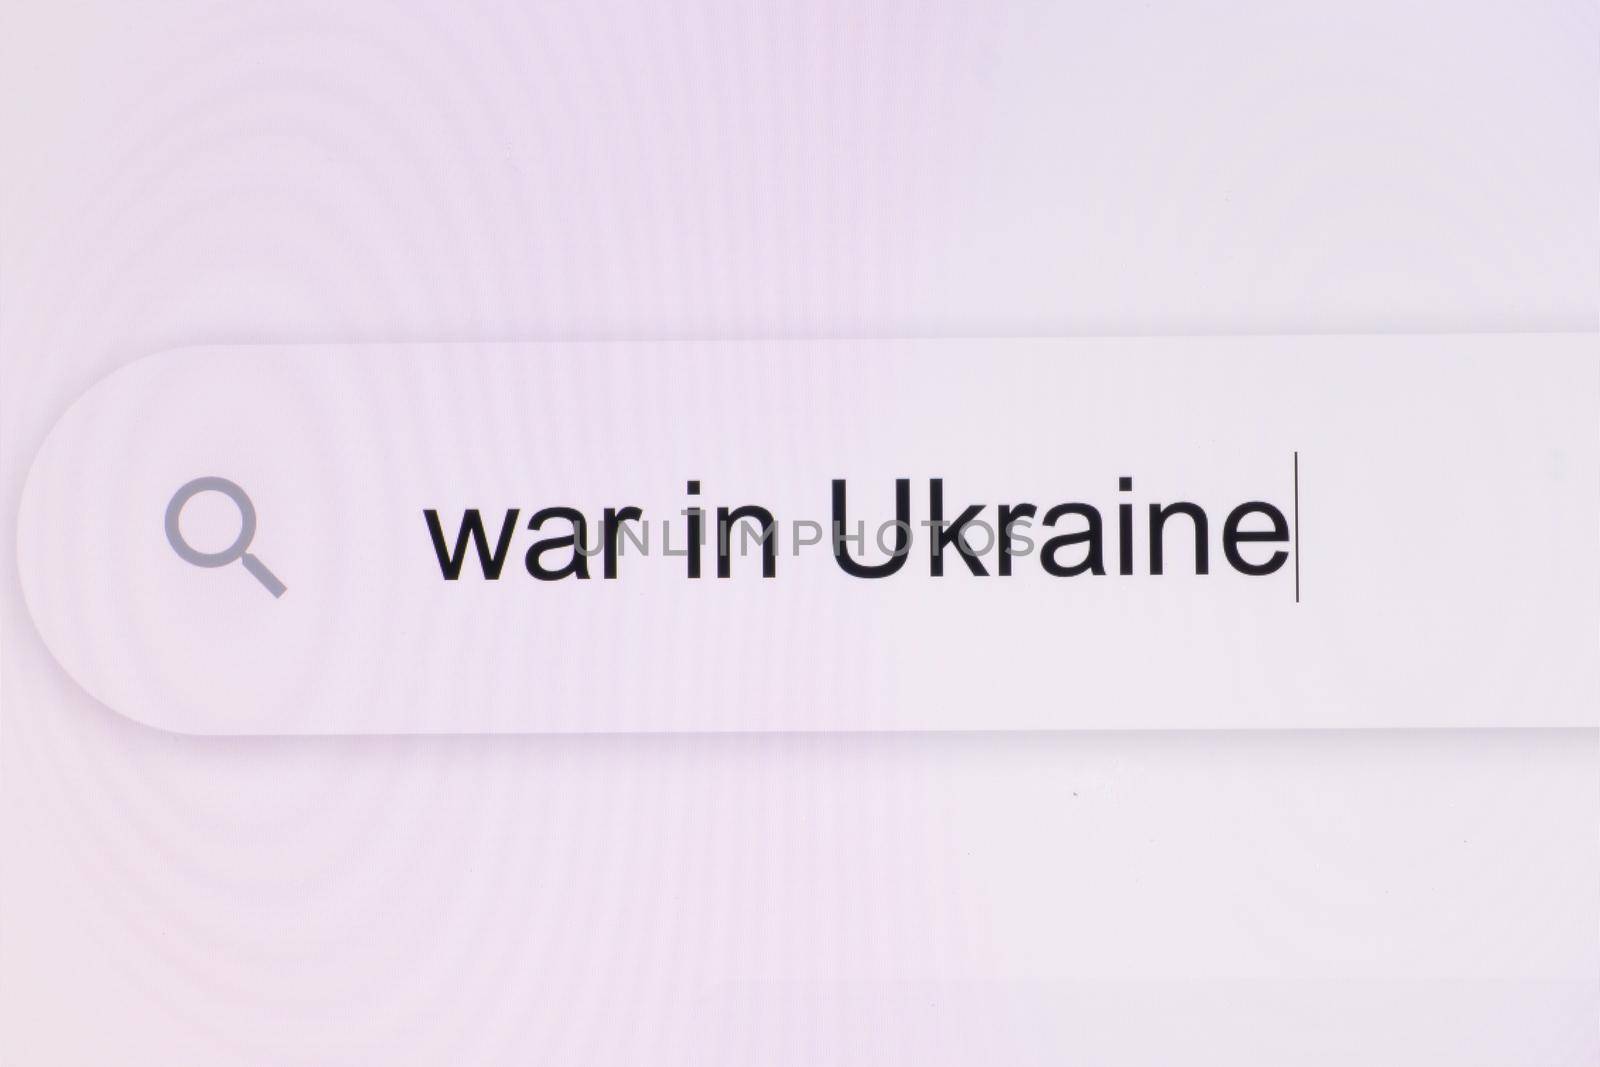 War in Ukraine animated headline of news outlets around the world. Russian Federation attacked Ukraine. War in Ukraine - Internet browser search bar question typing war related question.